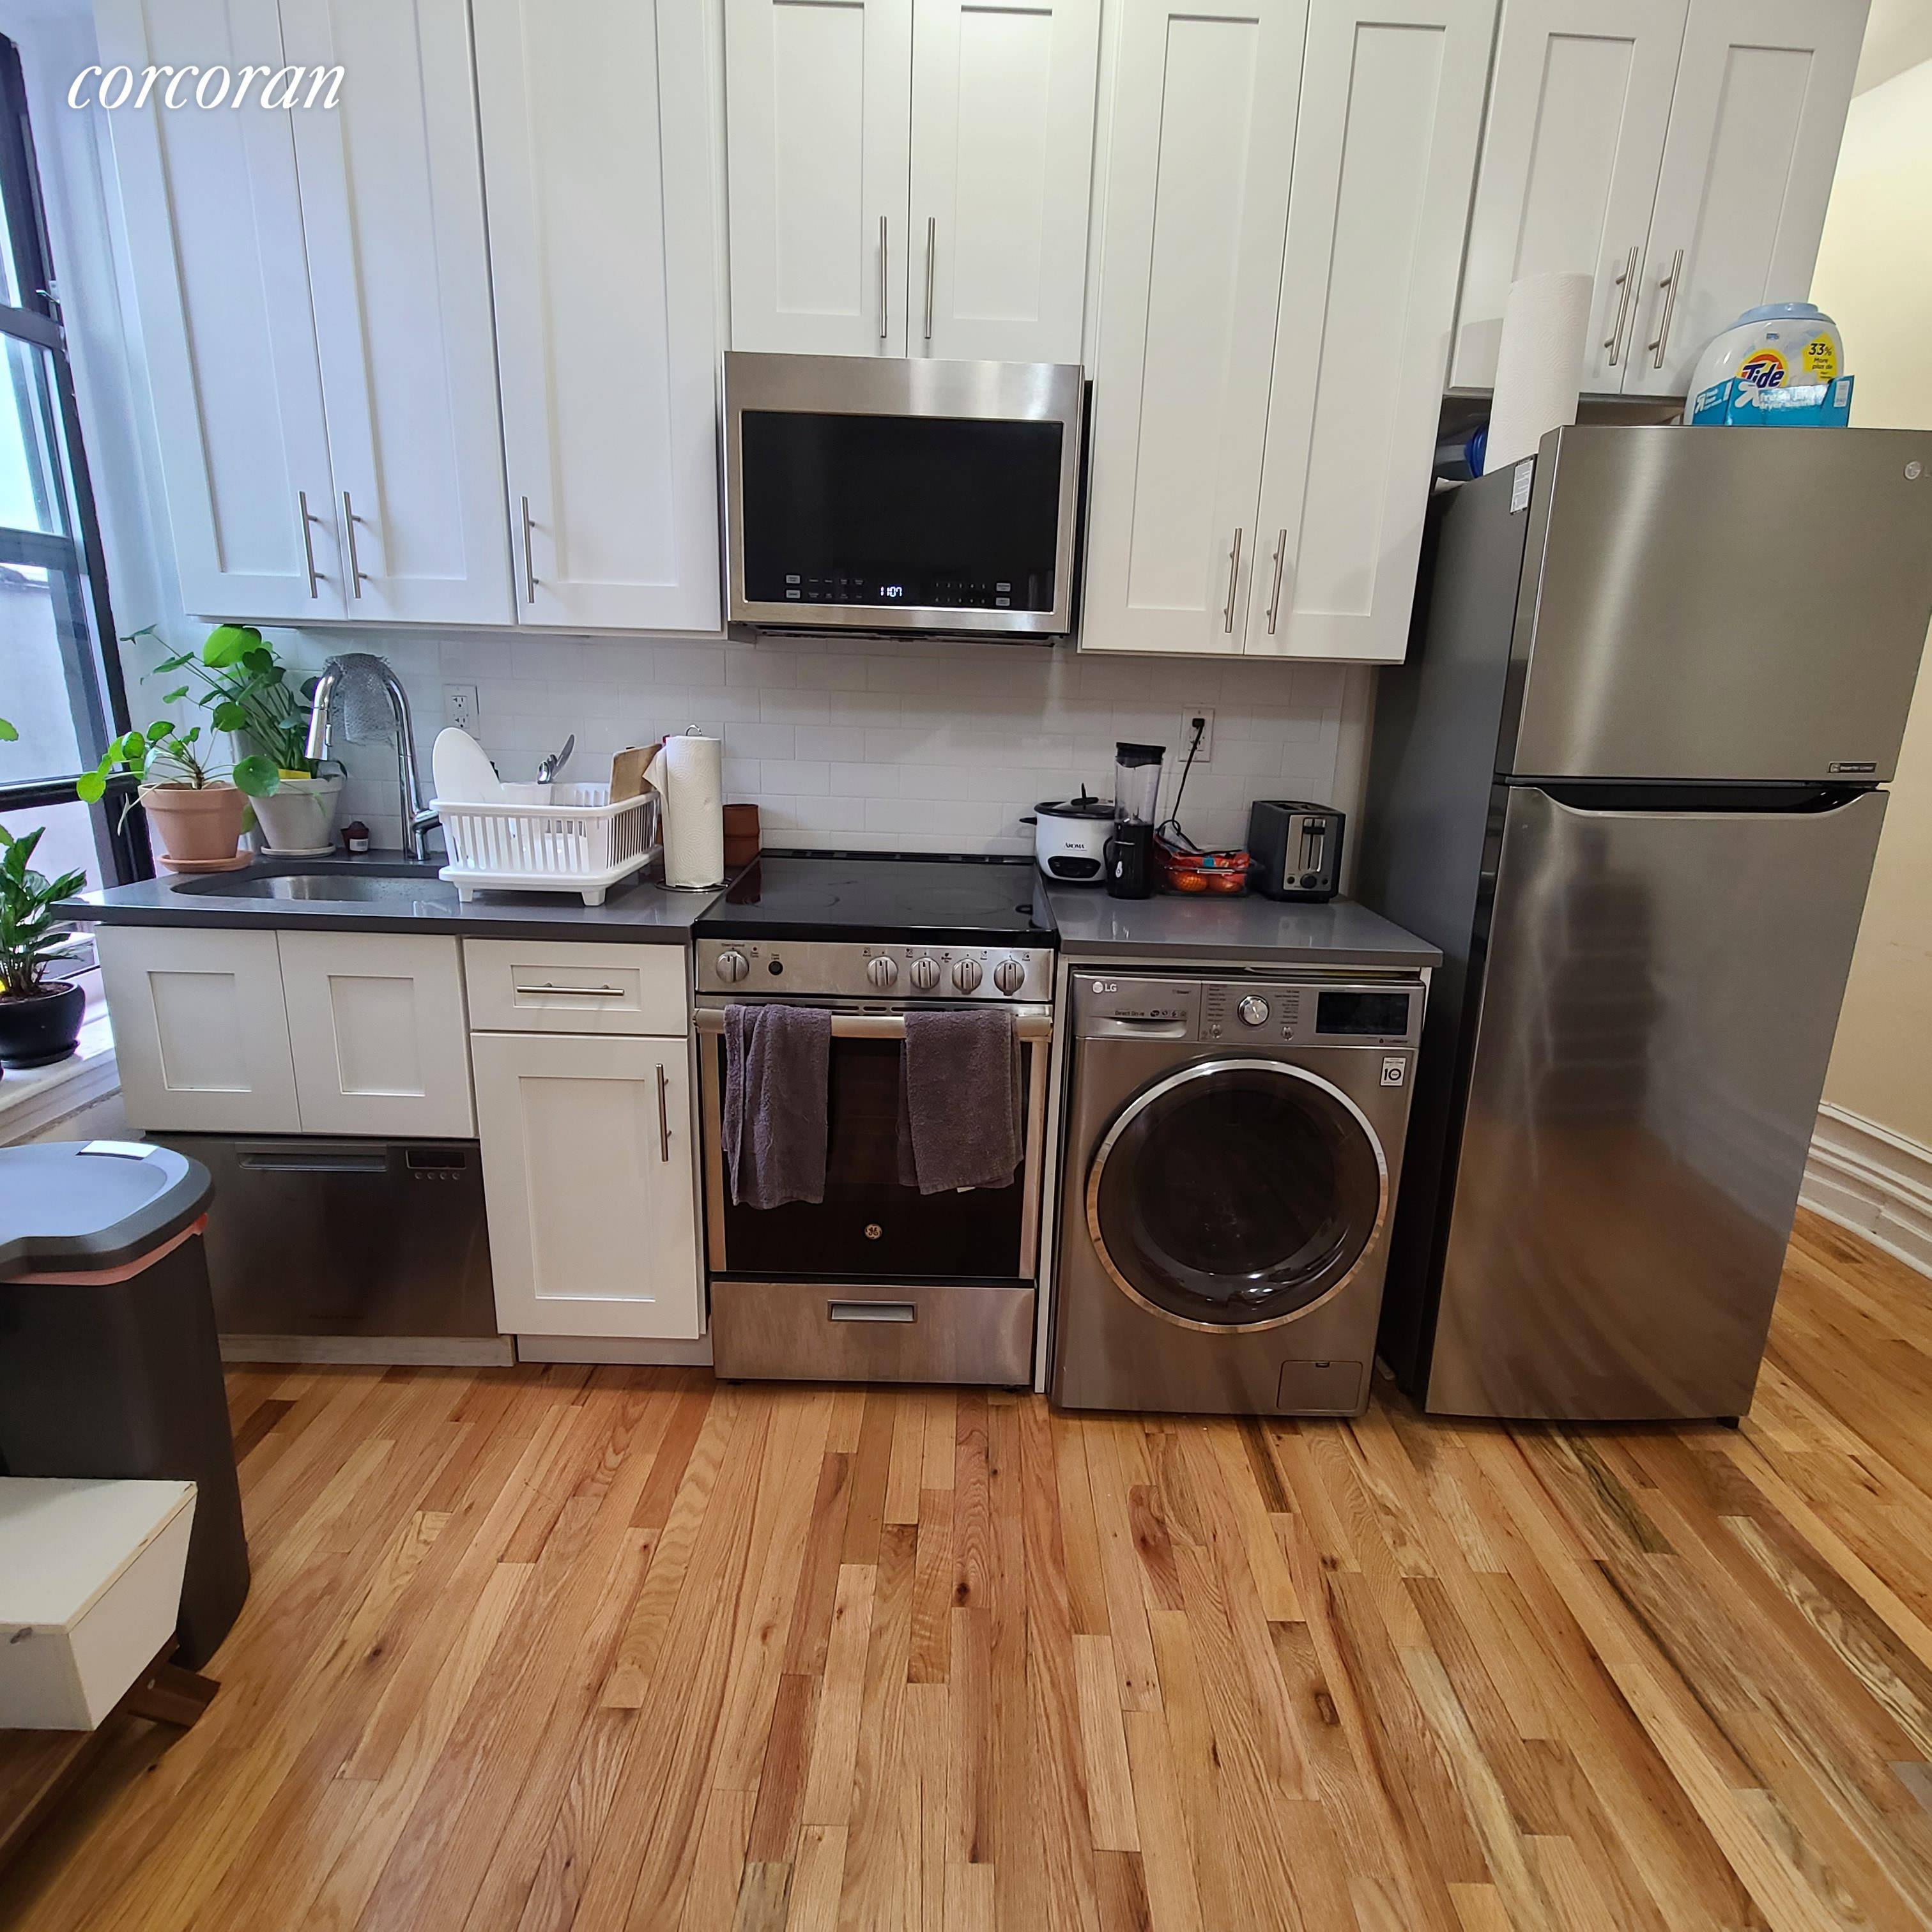 NO BROKER FEE NO FEE Brand new renovation, hardwood floors, exposed brick, stainless steel appliances including dishwasher.